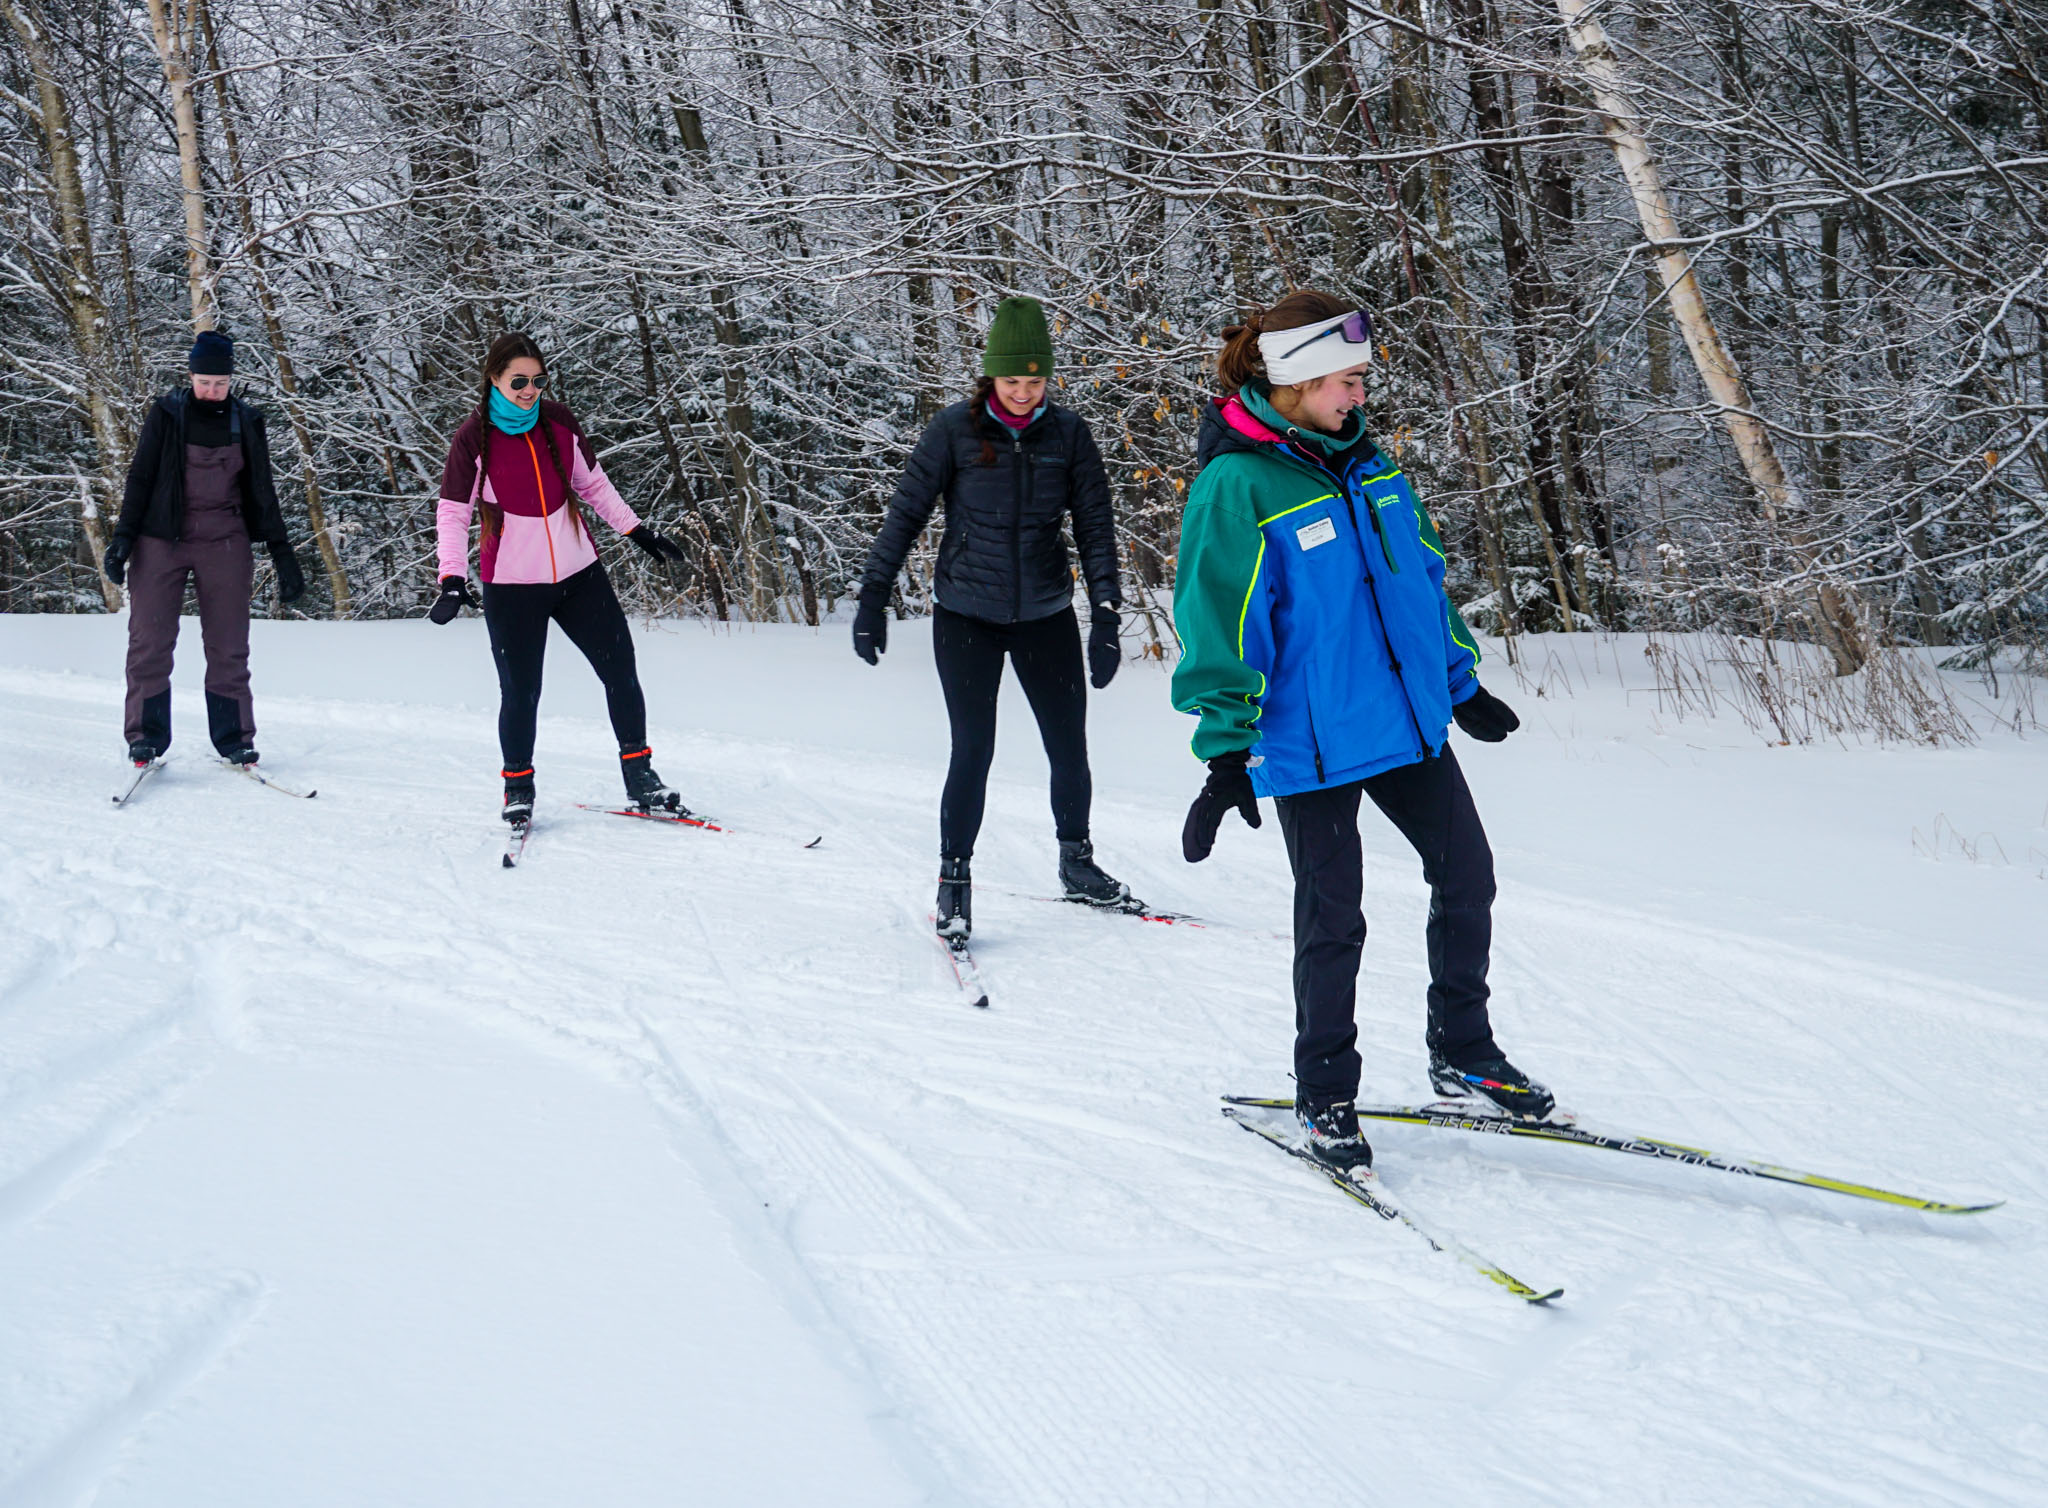 Babe Force: Skate Skiing - Uphill Technique Clinic - Bolton Valley